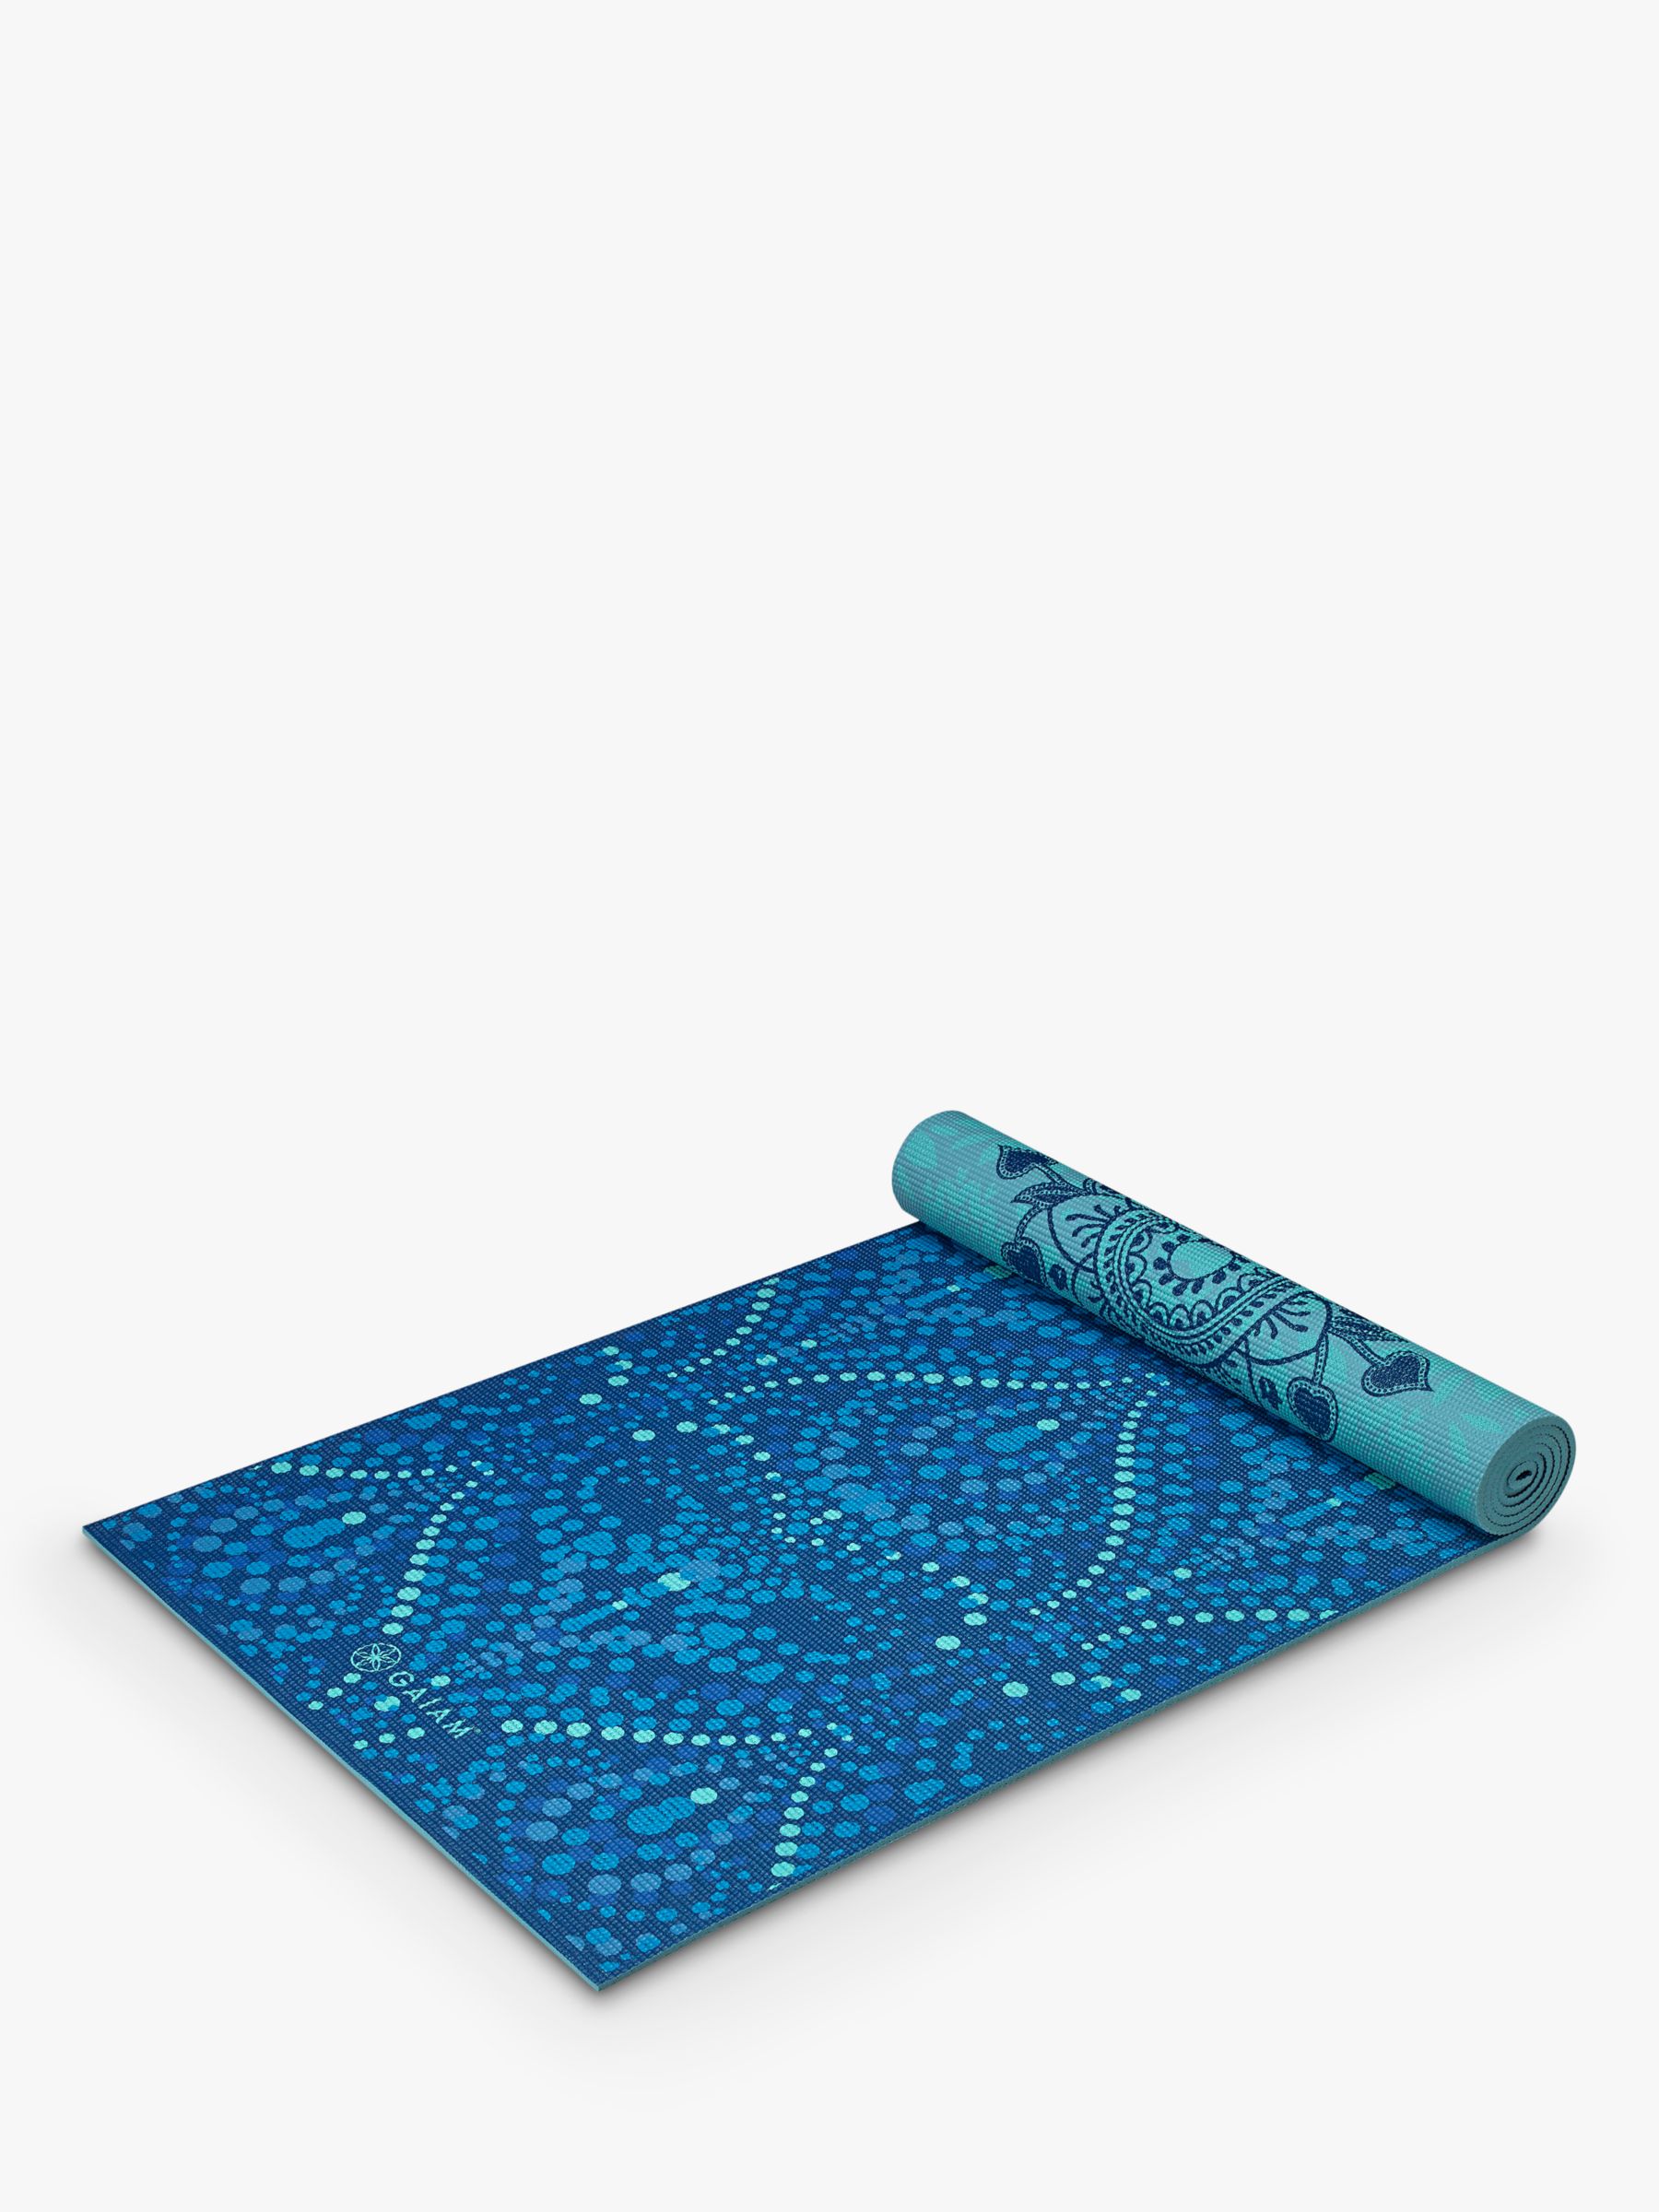 Gaiam Yoga Mat Premium Print Extra Thick Non Slip Exercise & Fitness Mat  for All Types of Yoga, Pilates & Floor Workouts, Niagara, 6mm 